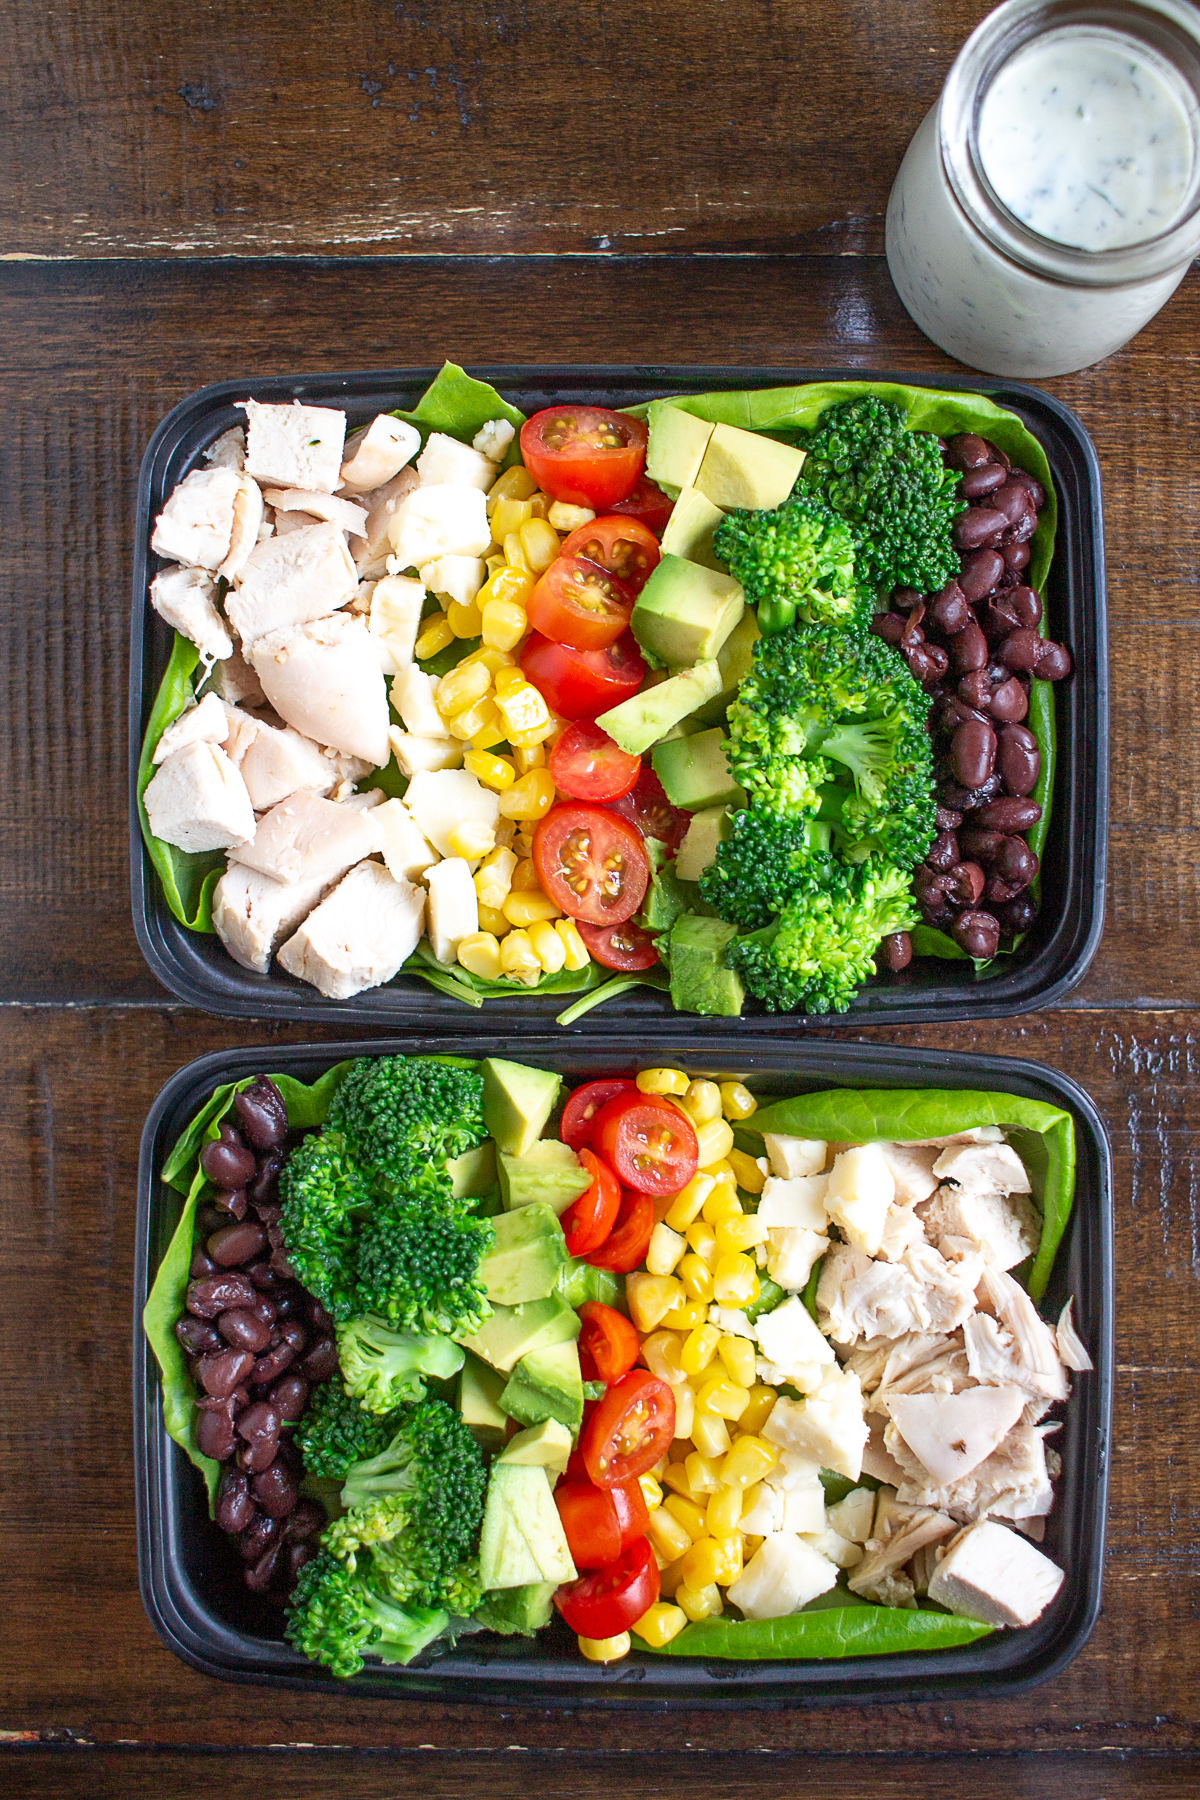 Meal Prep Salads for Weight Loss (Healthy Cobb Salad Recipe)